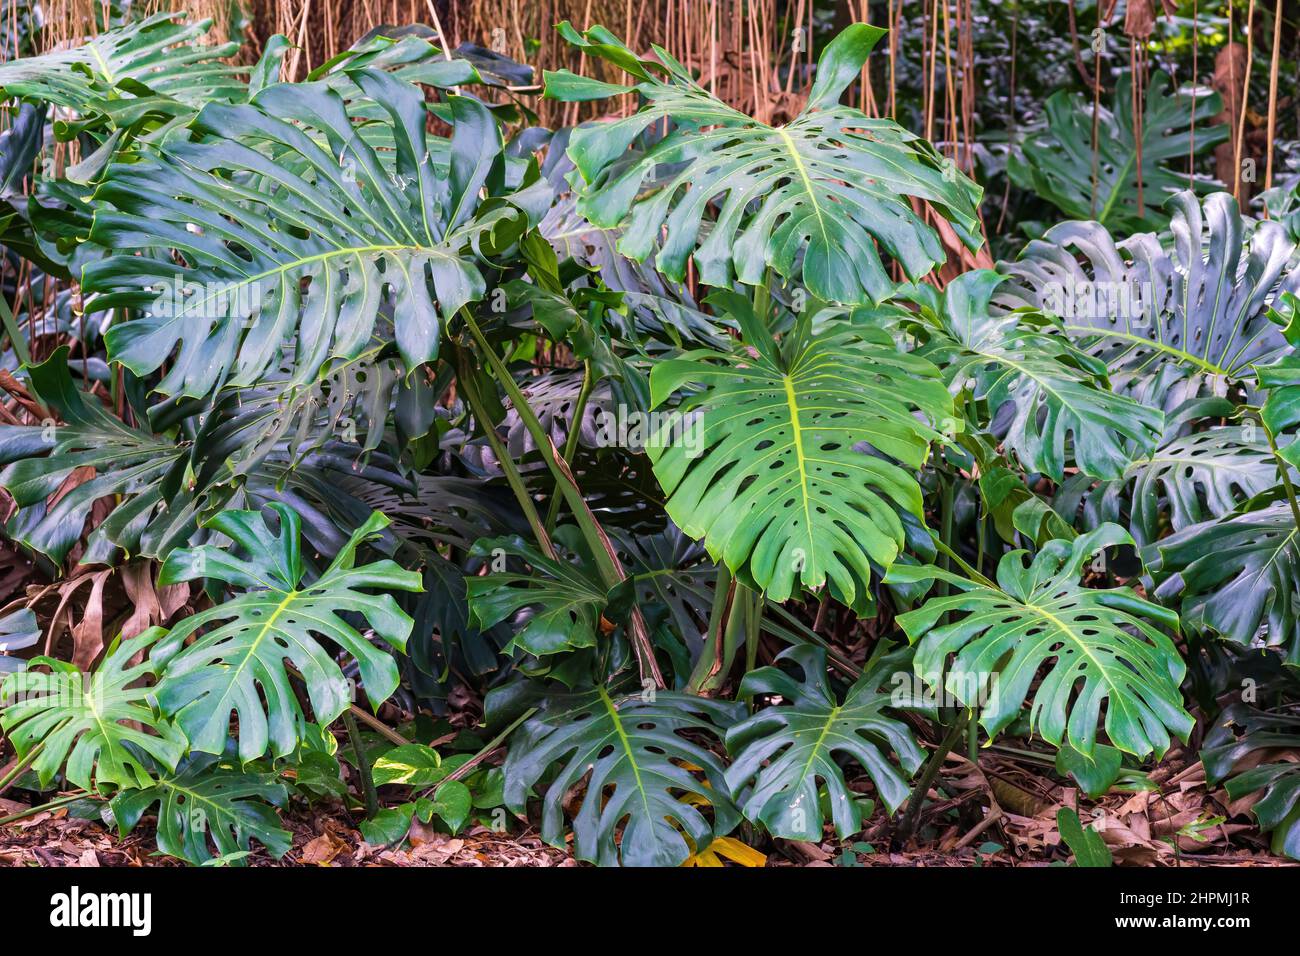 Split-leaf philodendron a.k.a. Swiss cheese plant (Monstera deliciosa) - Florida, USA Stock Photo